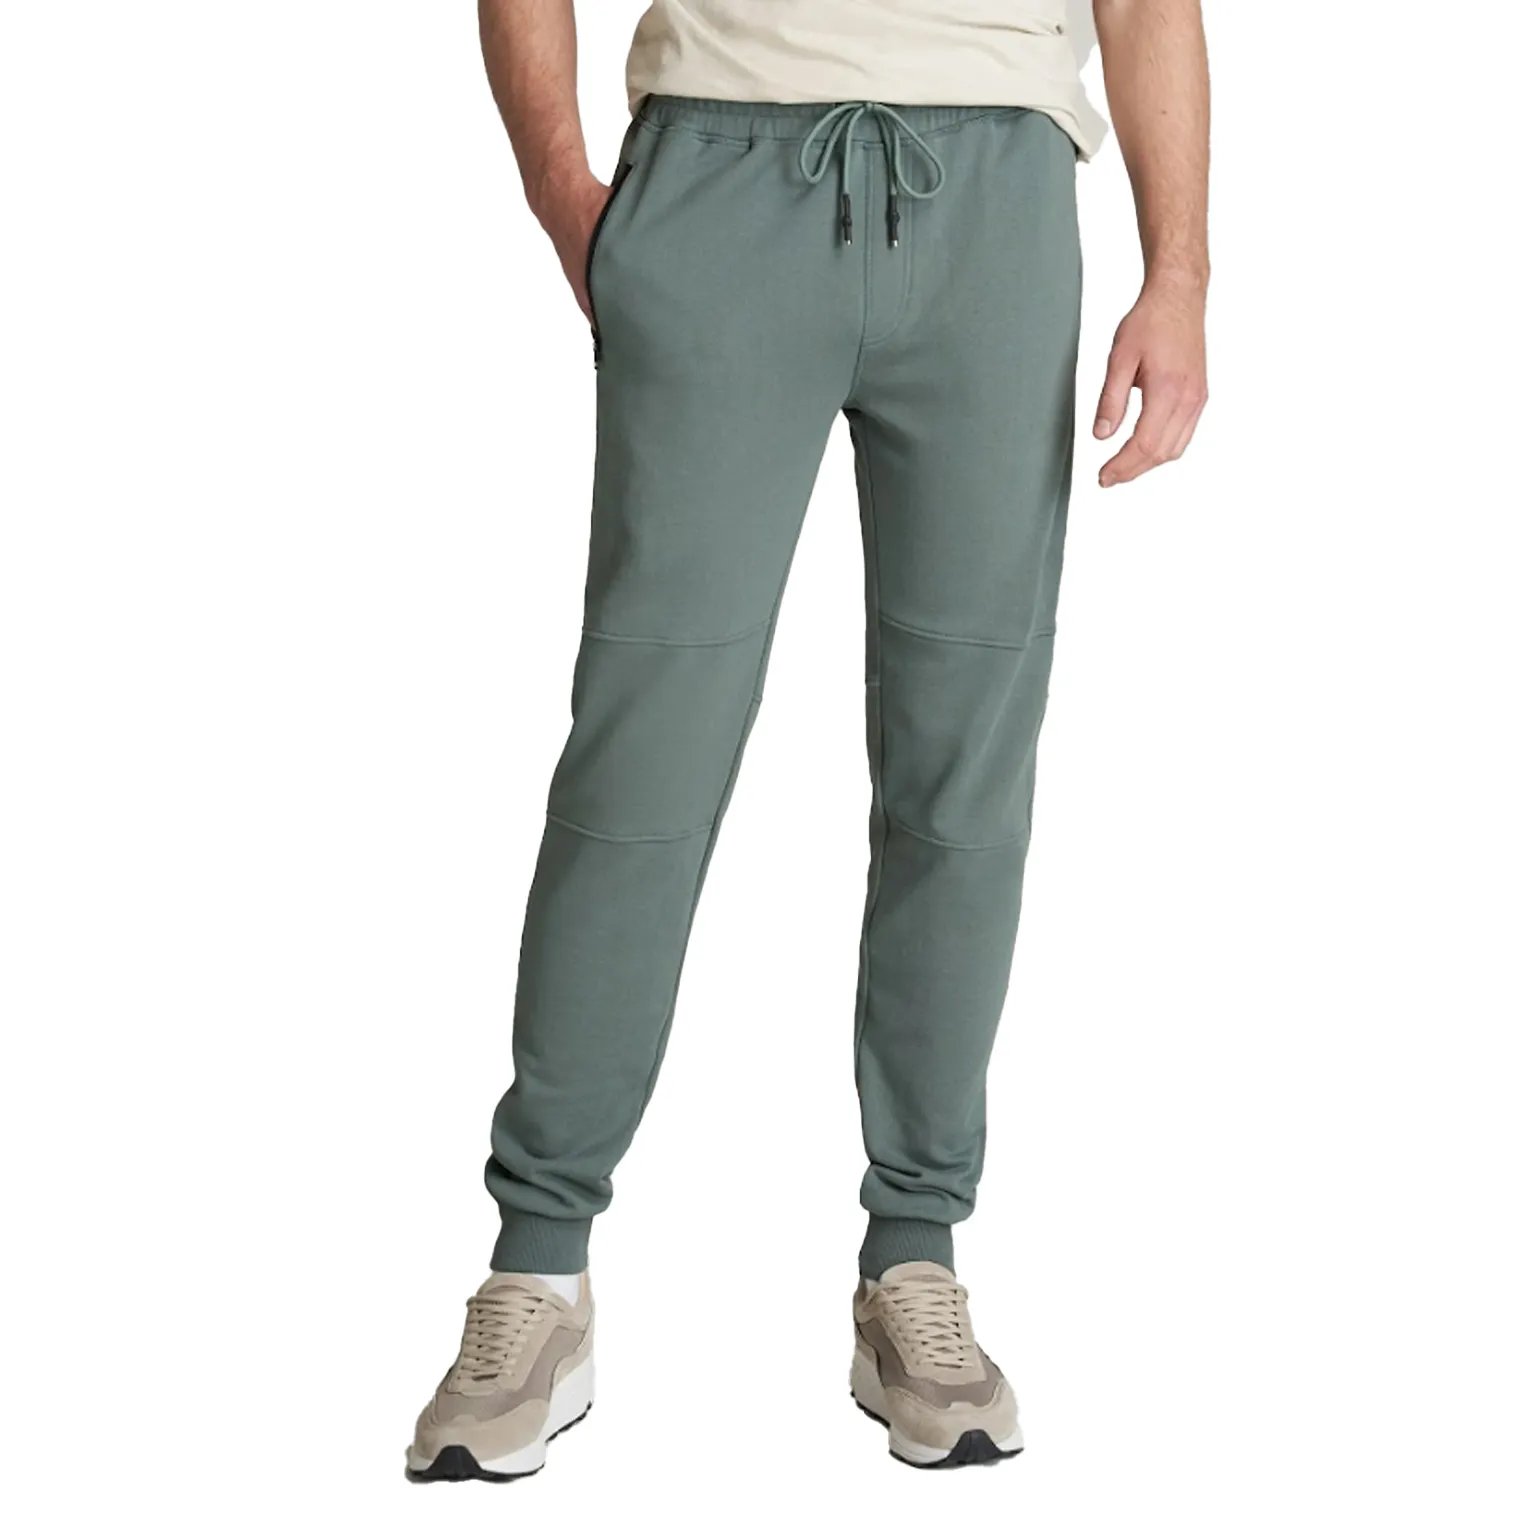 Men’s Joggers Manufacturing with recycled materials